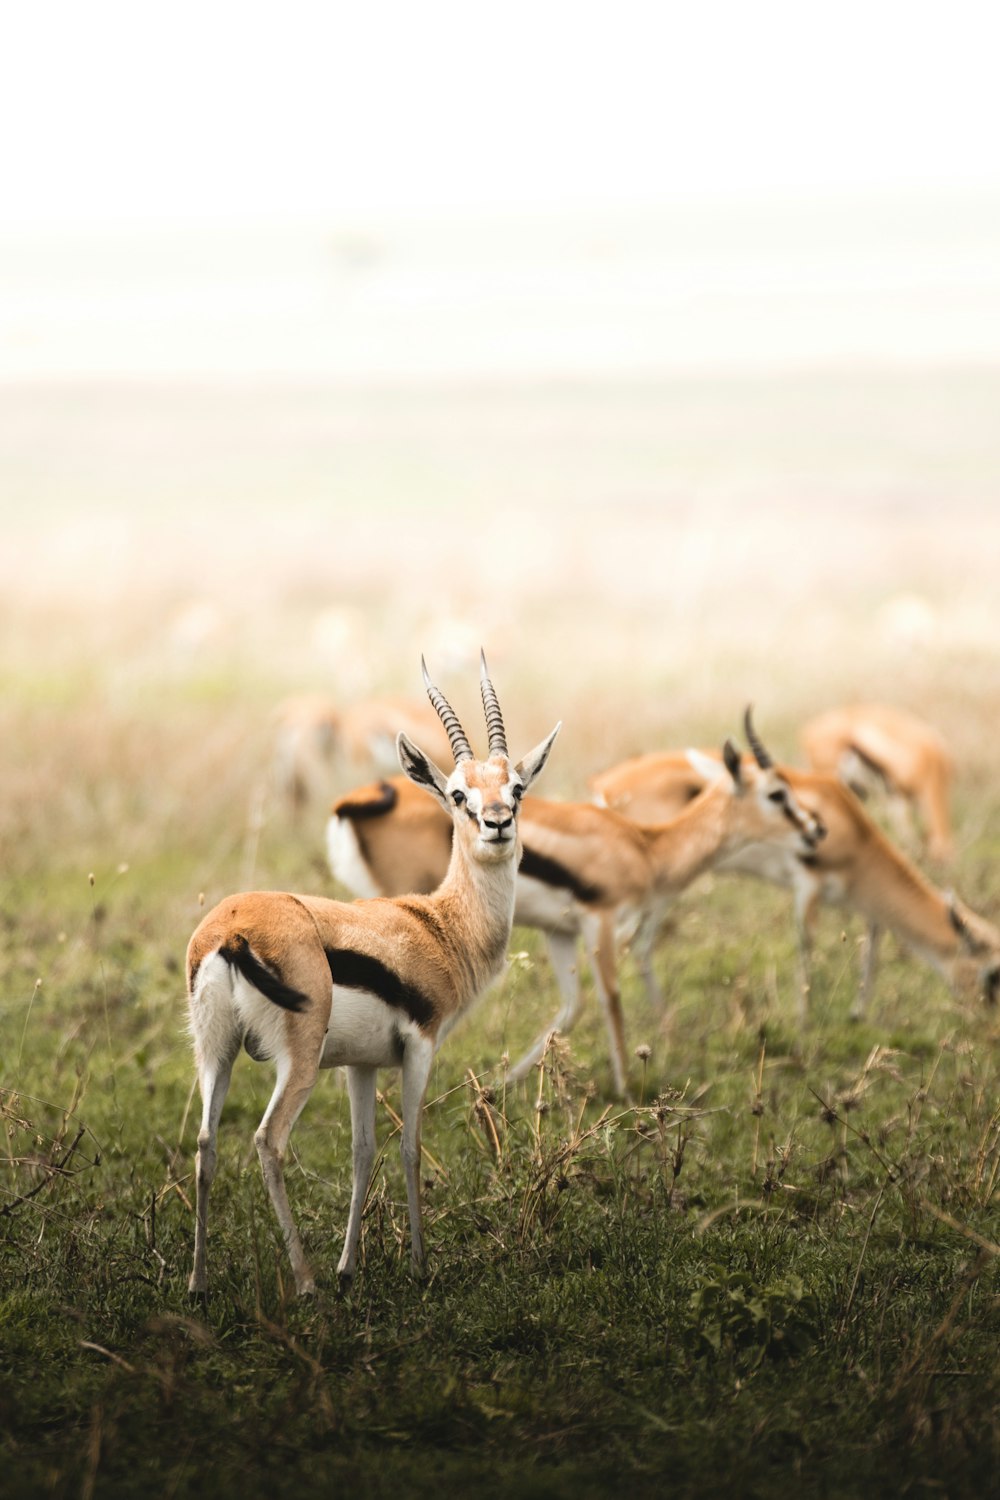 a herd of gazelle standing on top of a lush green field